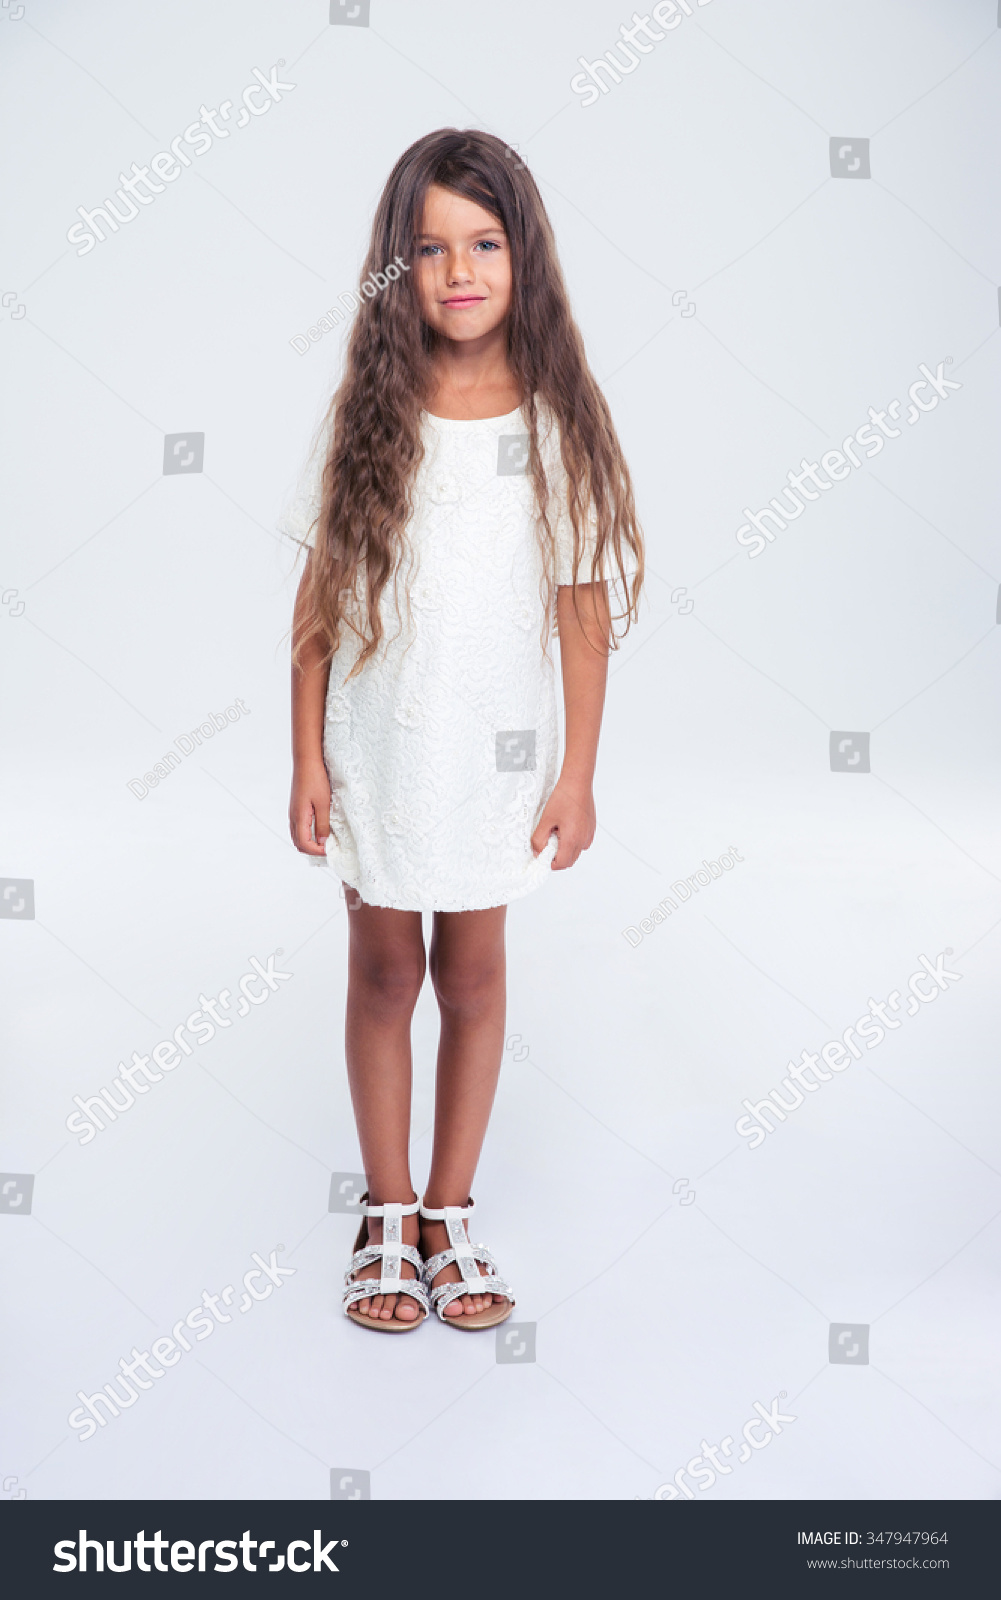 Full Length Portrait Of A Pretty Little Girl In Dress Standing Isolated ...